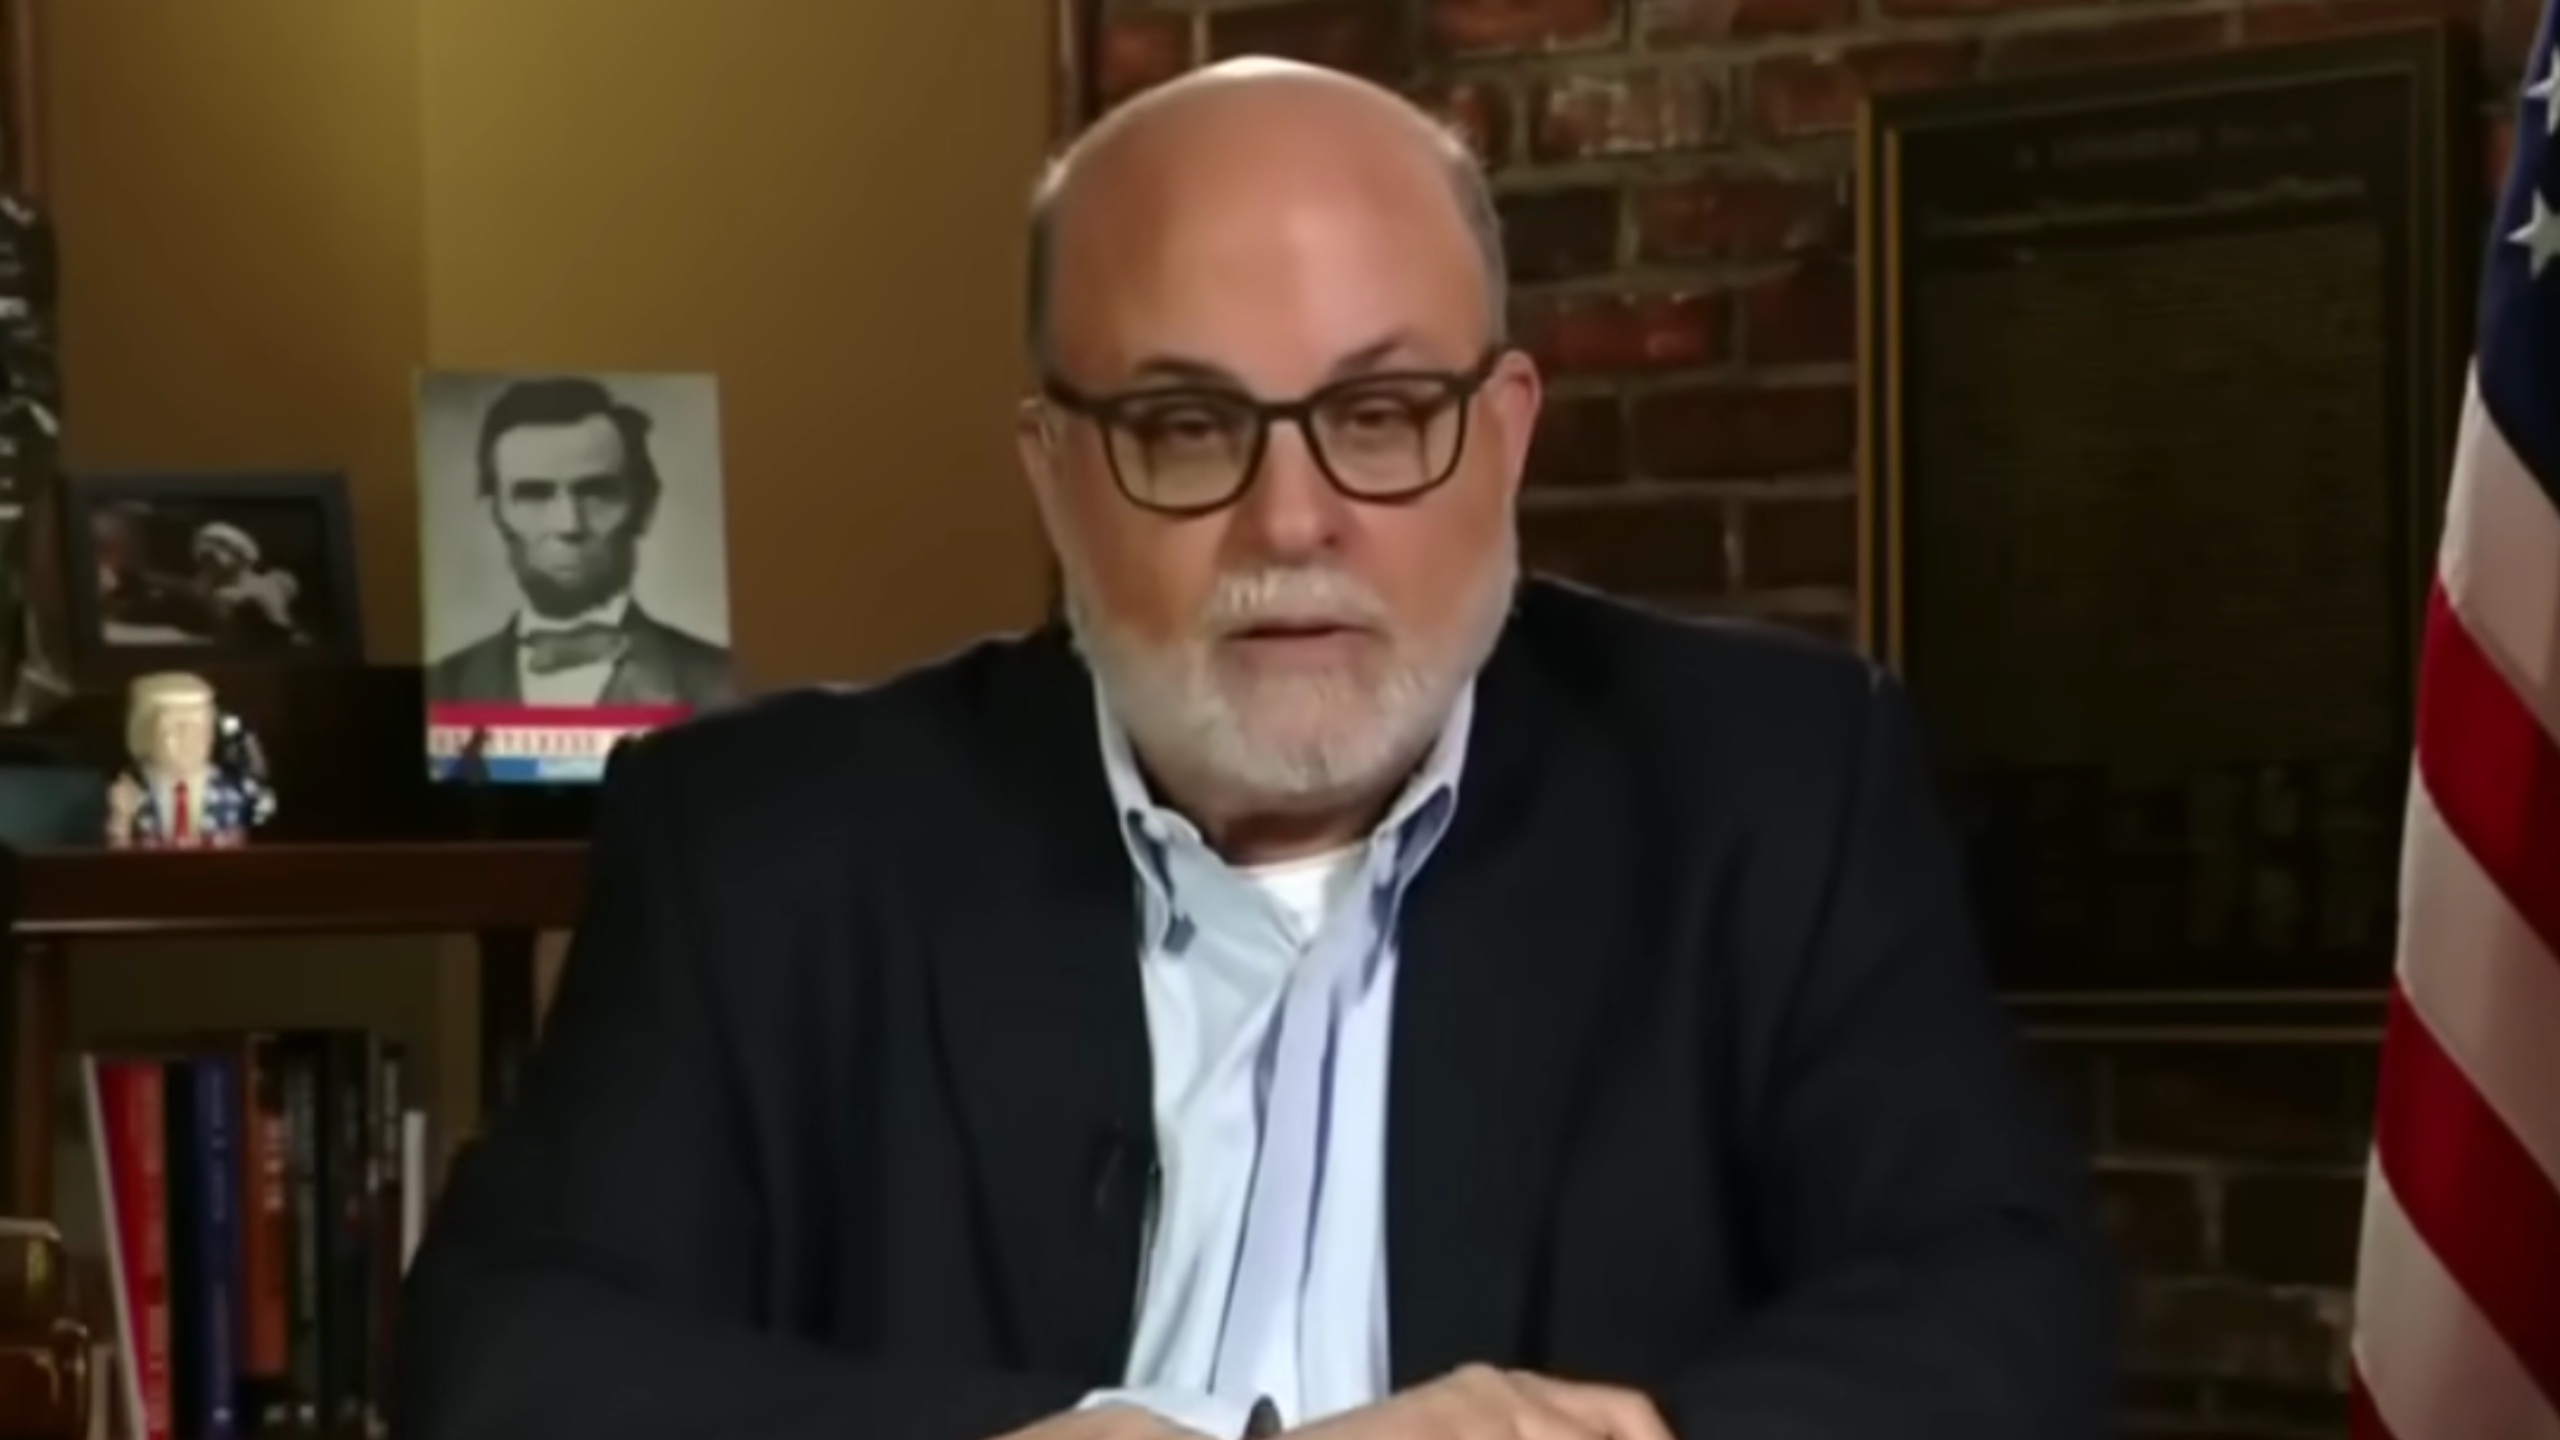 Fox News Host Mark Levin Takes Aim at Network’s Own Legal Analyst Over Trump Indictment Analysis